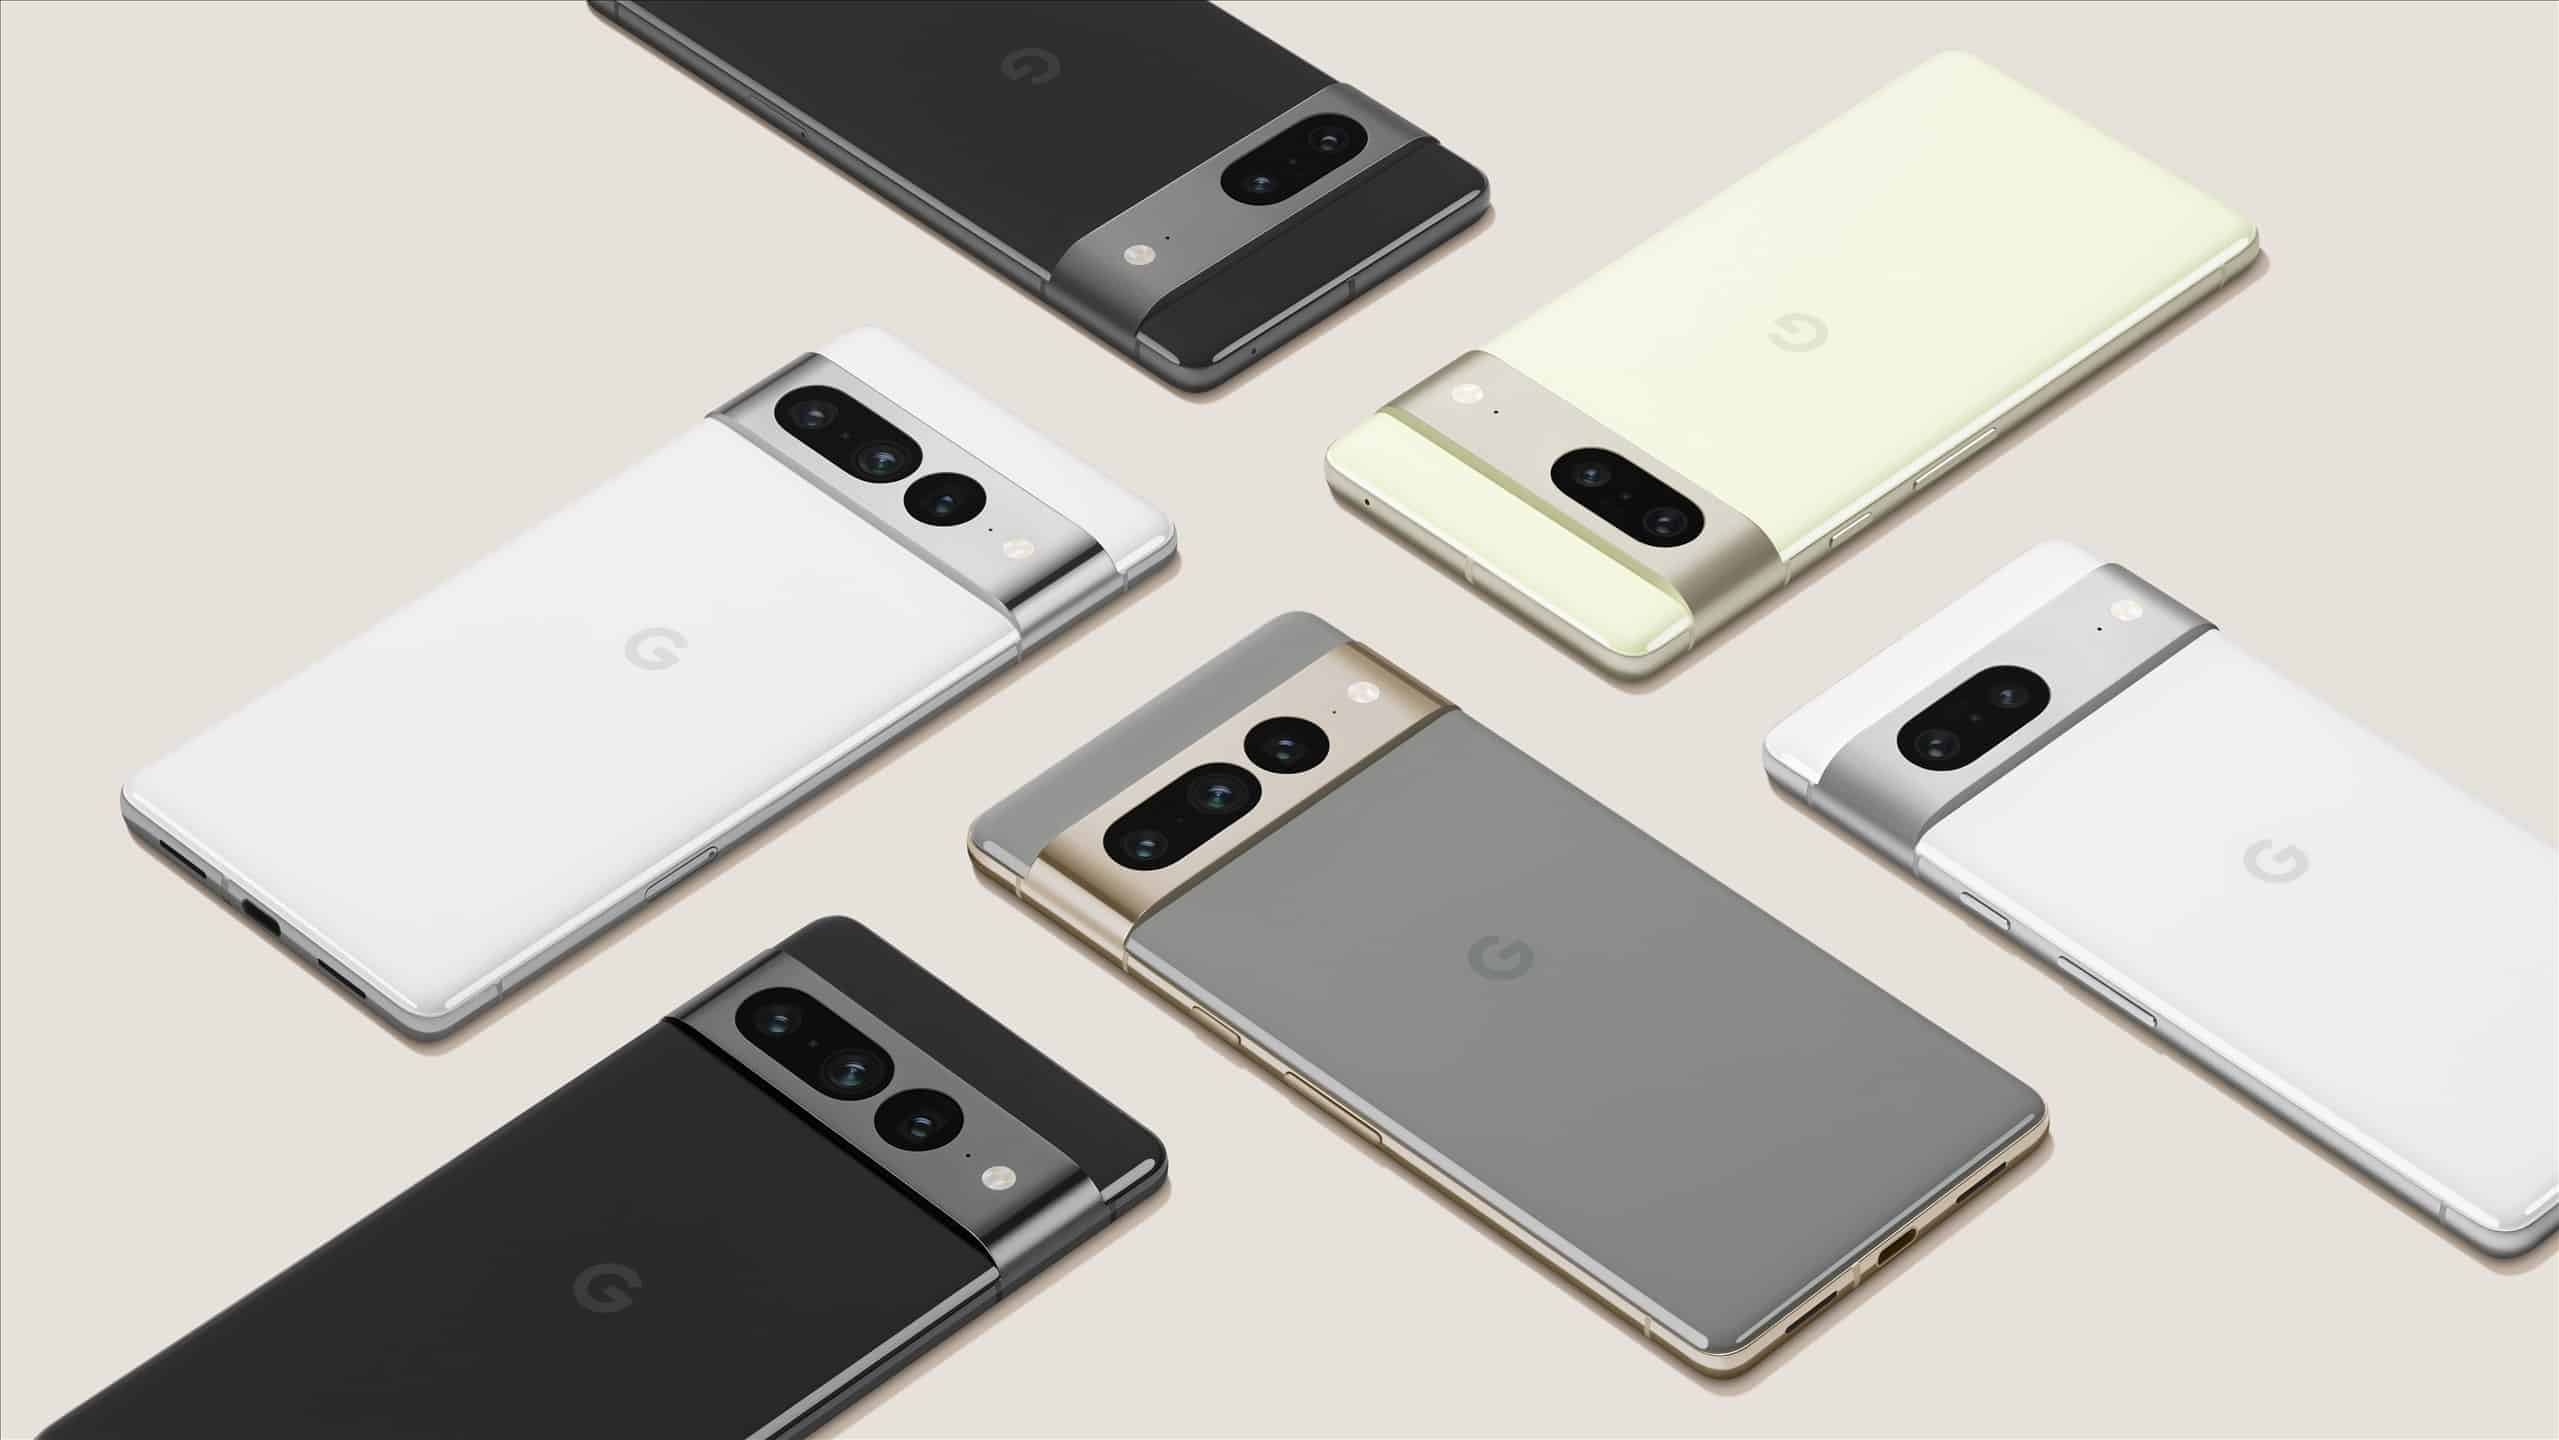 A bunch of new Google Pixel products coming your way, including the new Google Pixel 7 and Pixel 7 Pro!